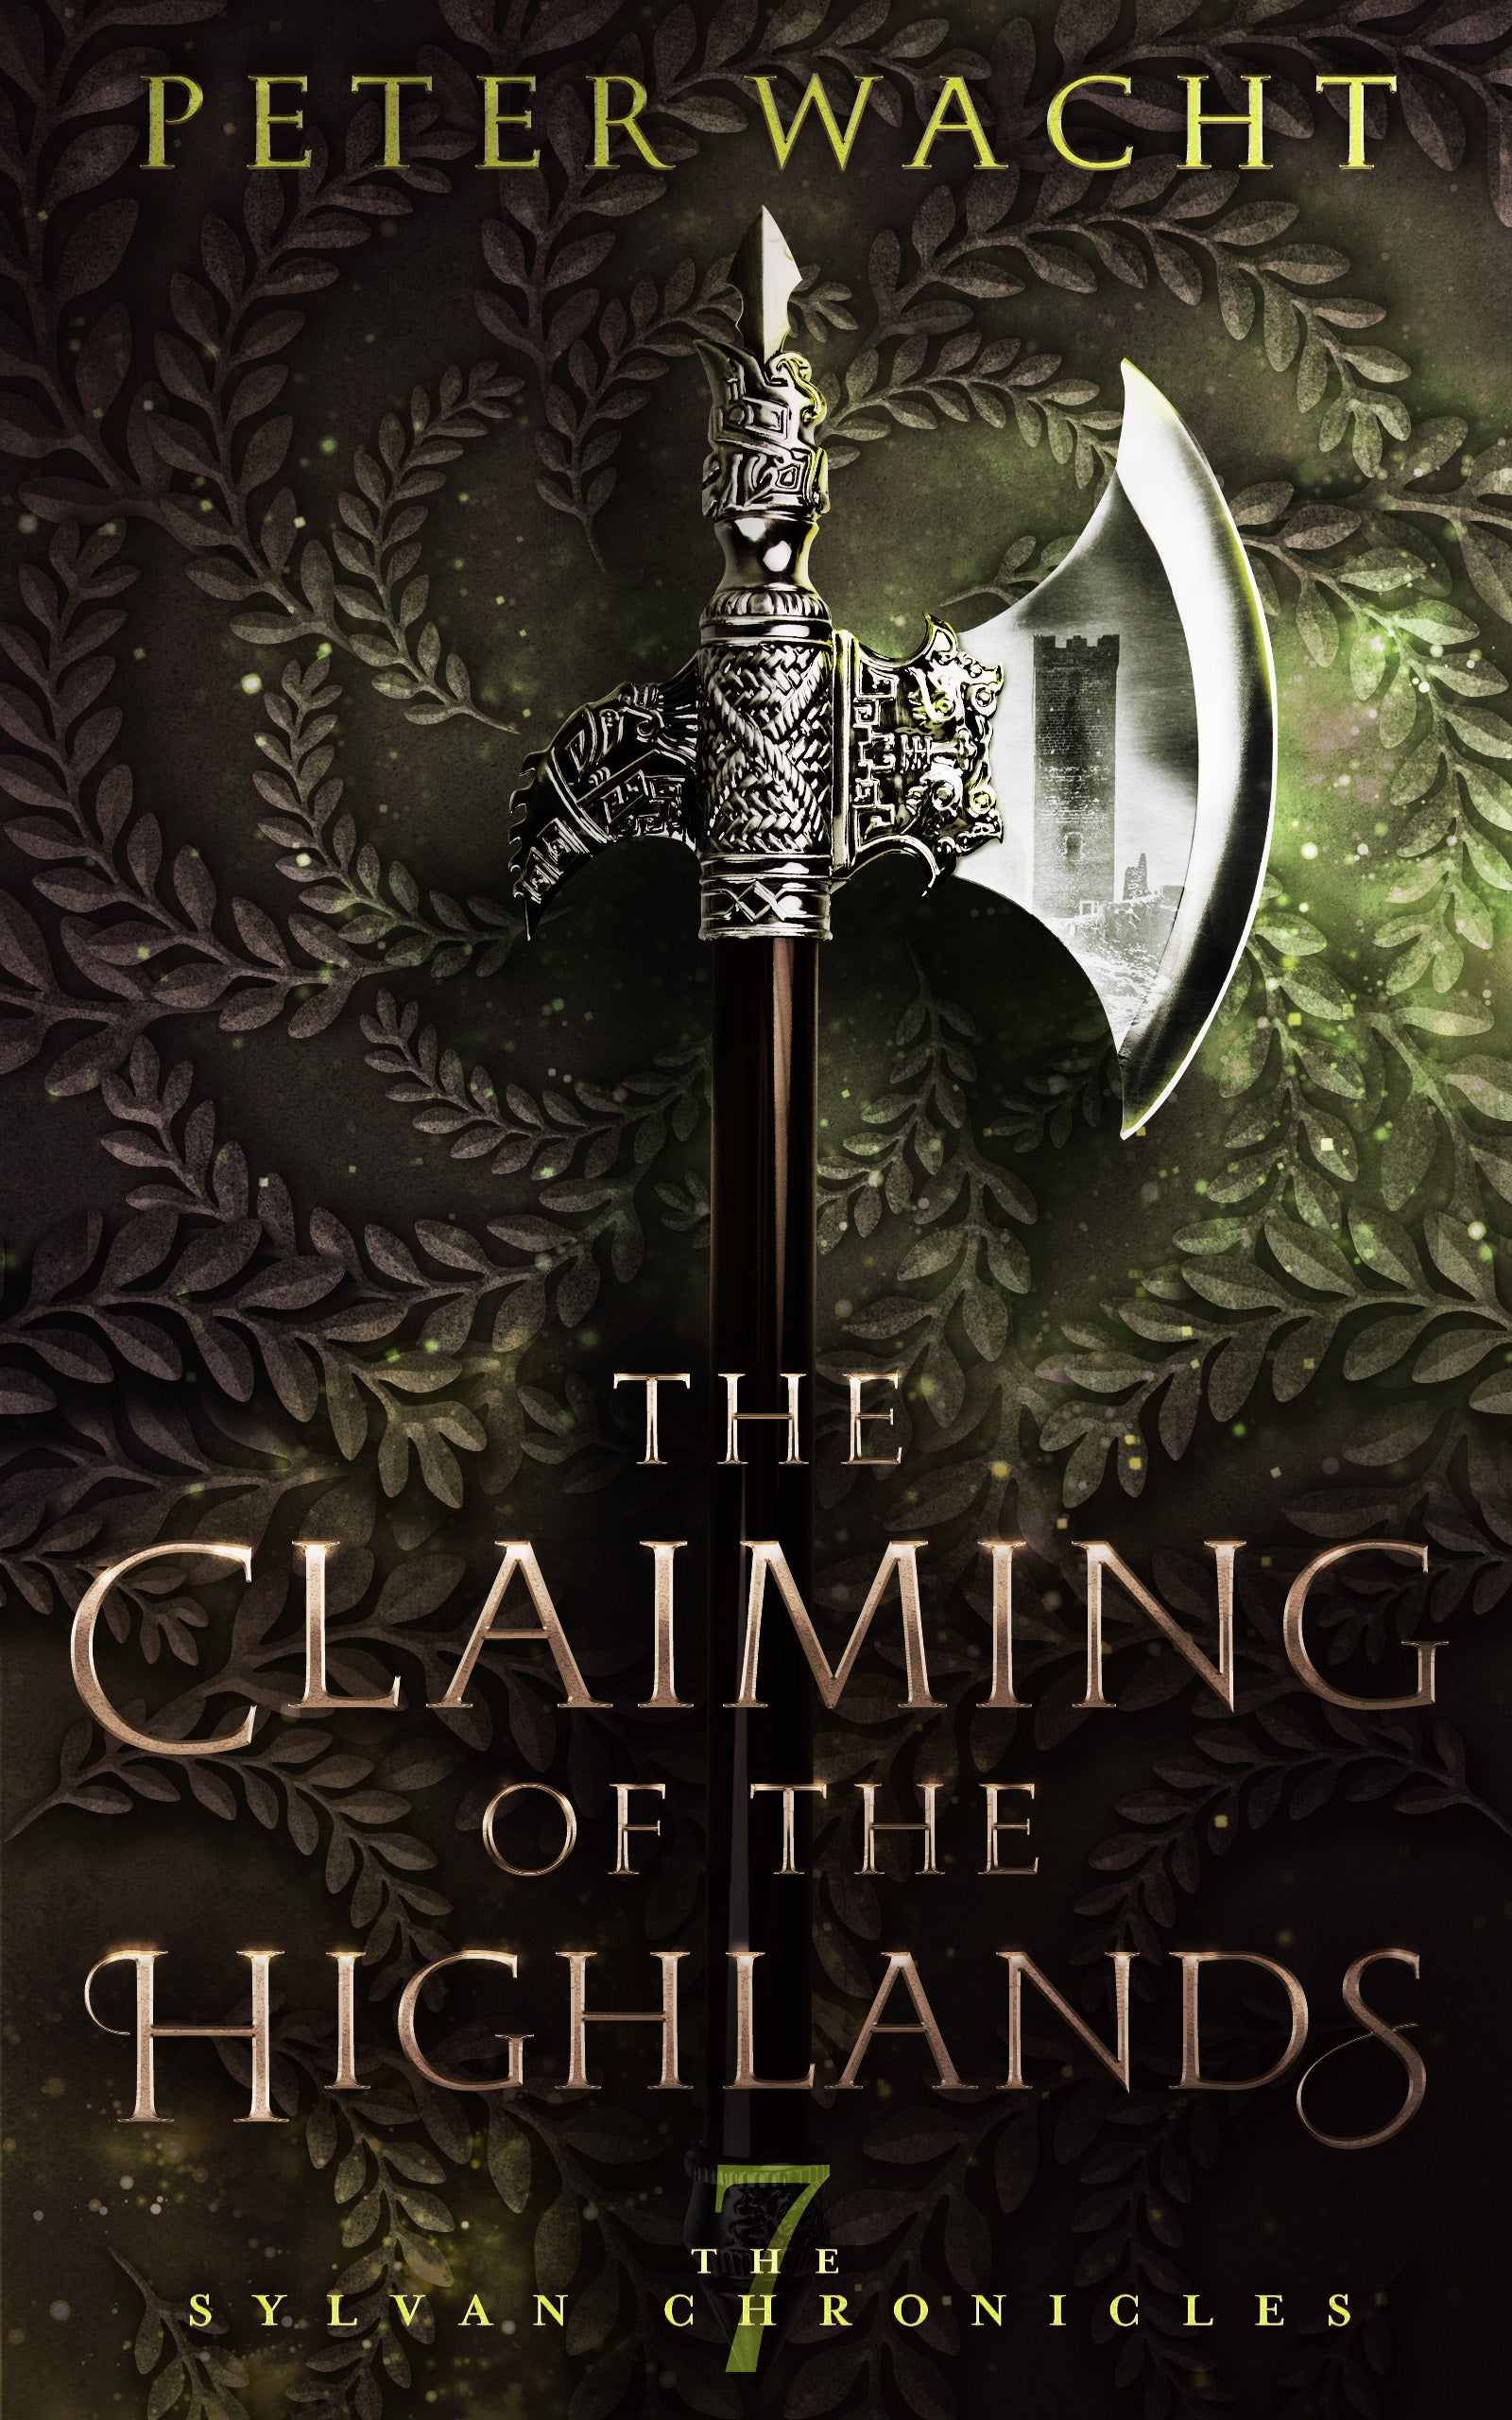 The Claiming of the Highlands by Peter Wacht